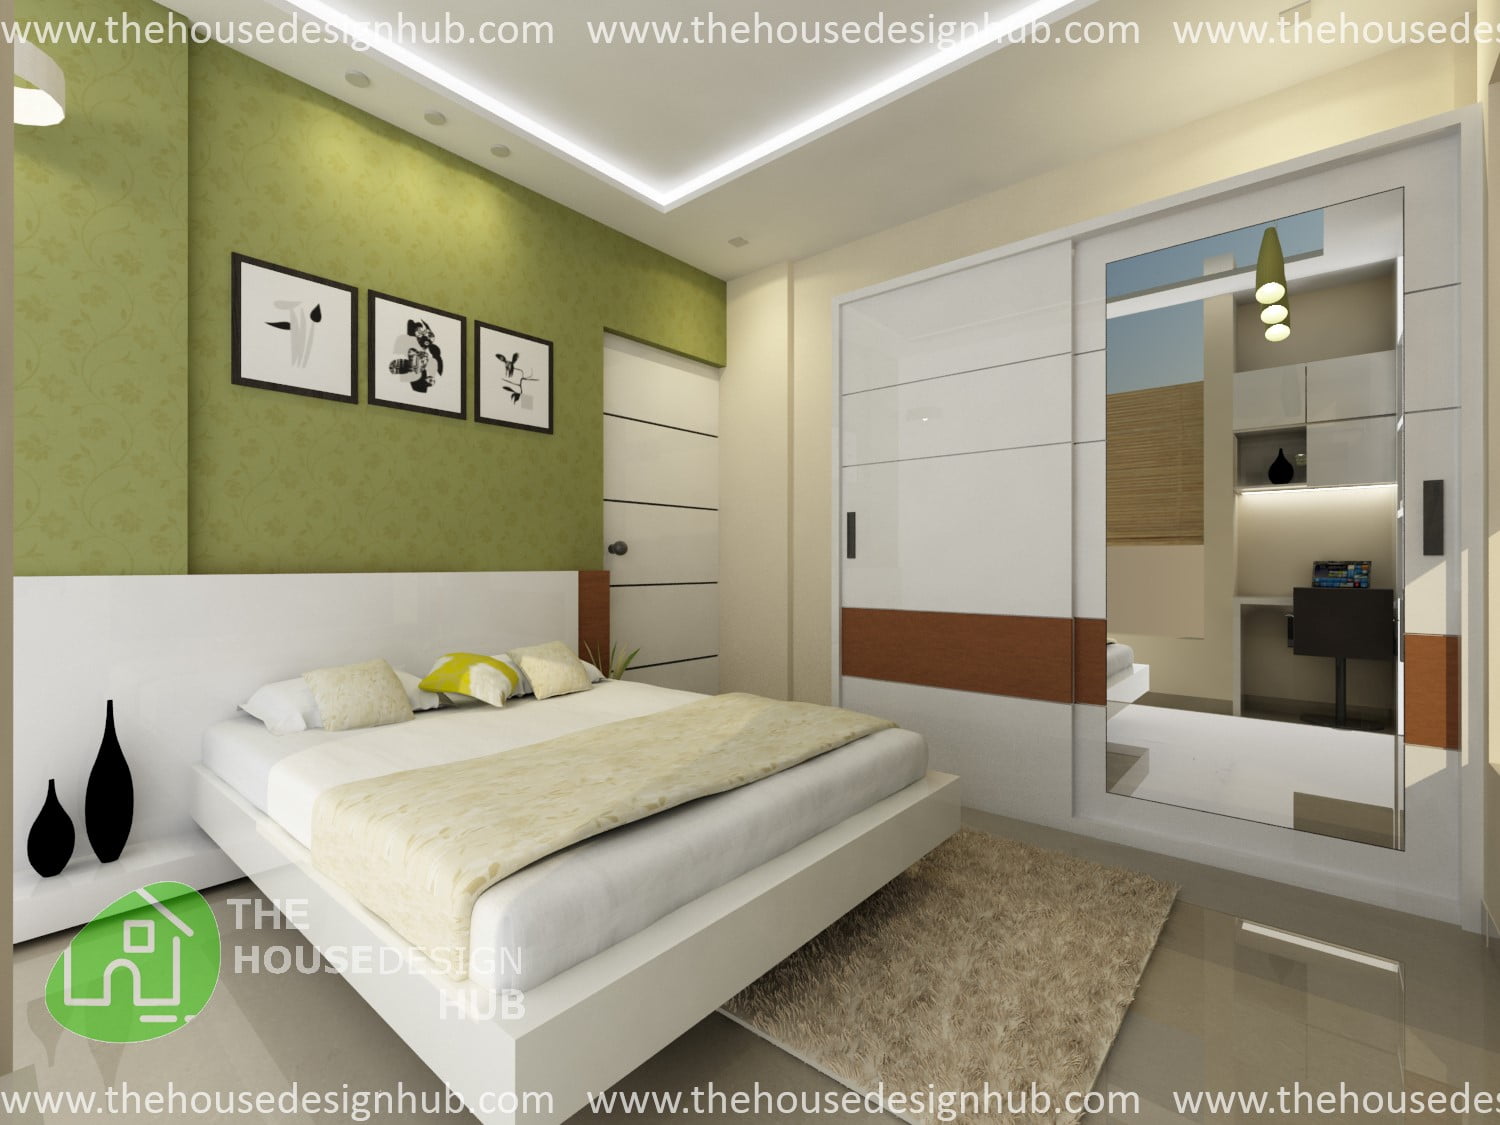 20I. Simple Bedroom Design In Green Texture   The House Design Hub